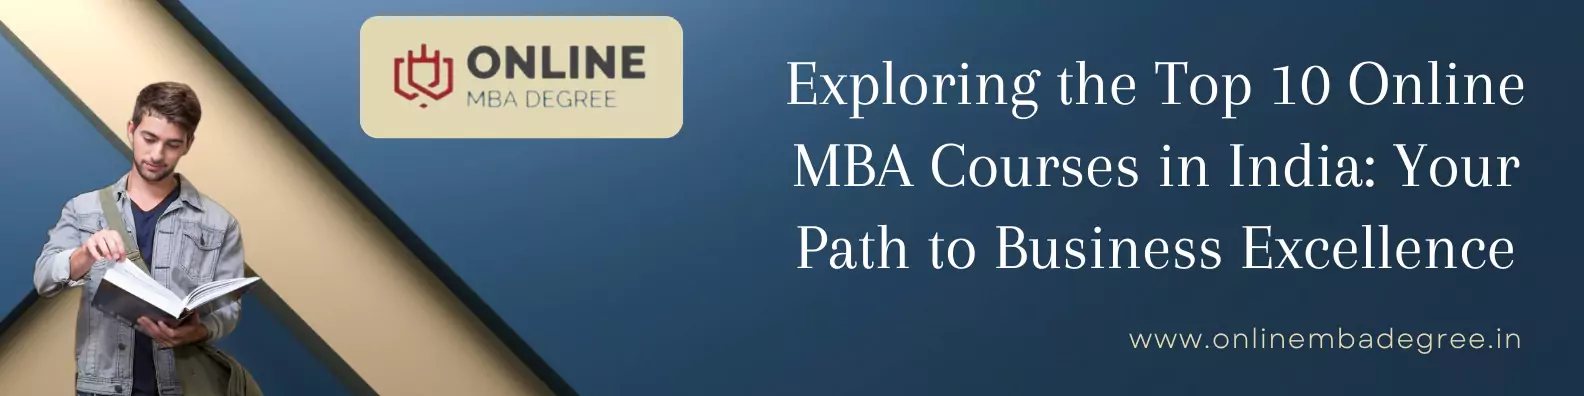 Exploring Top 10 Online MBA Courses In India